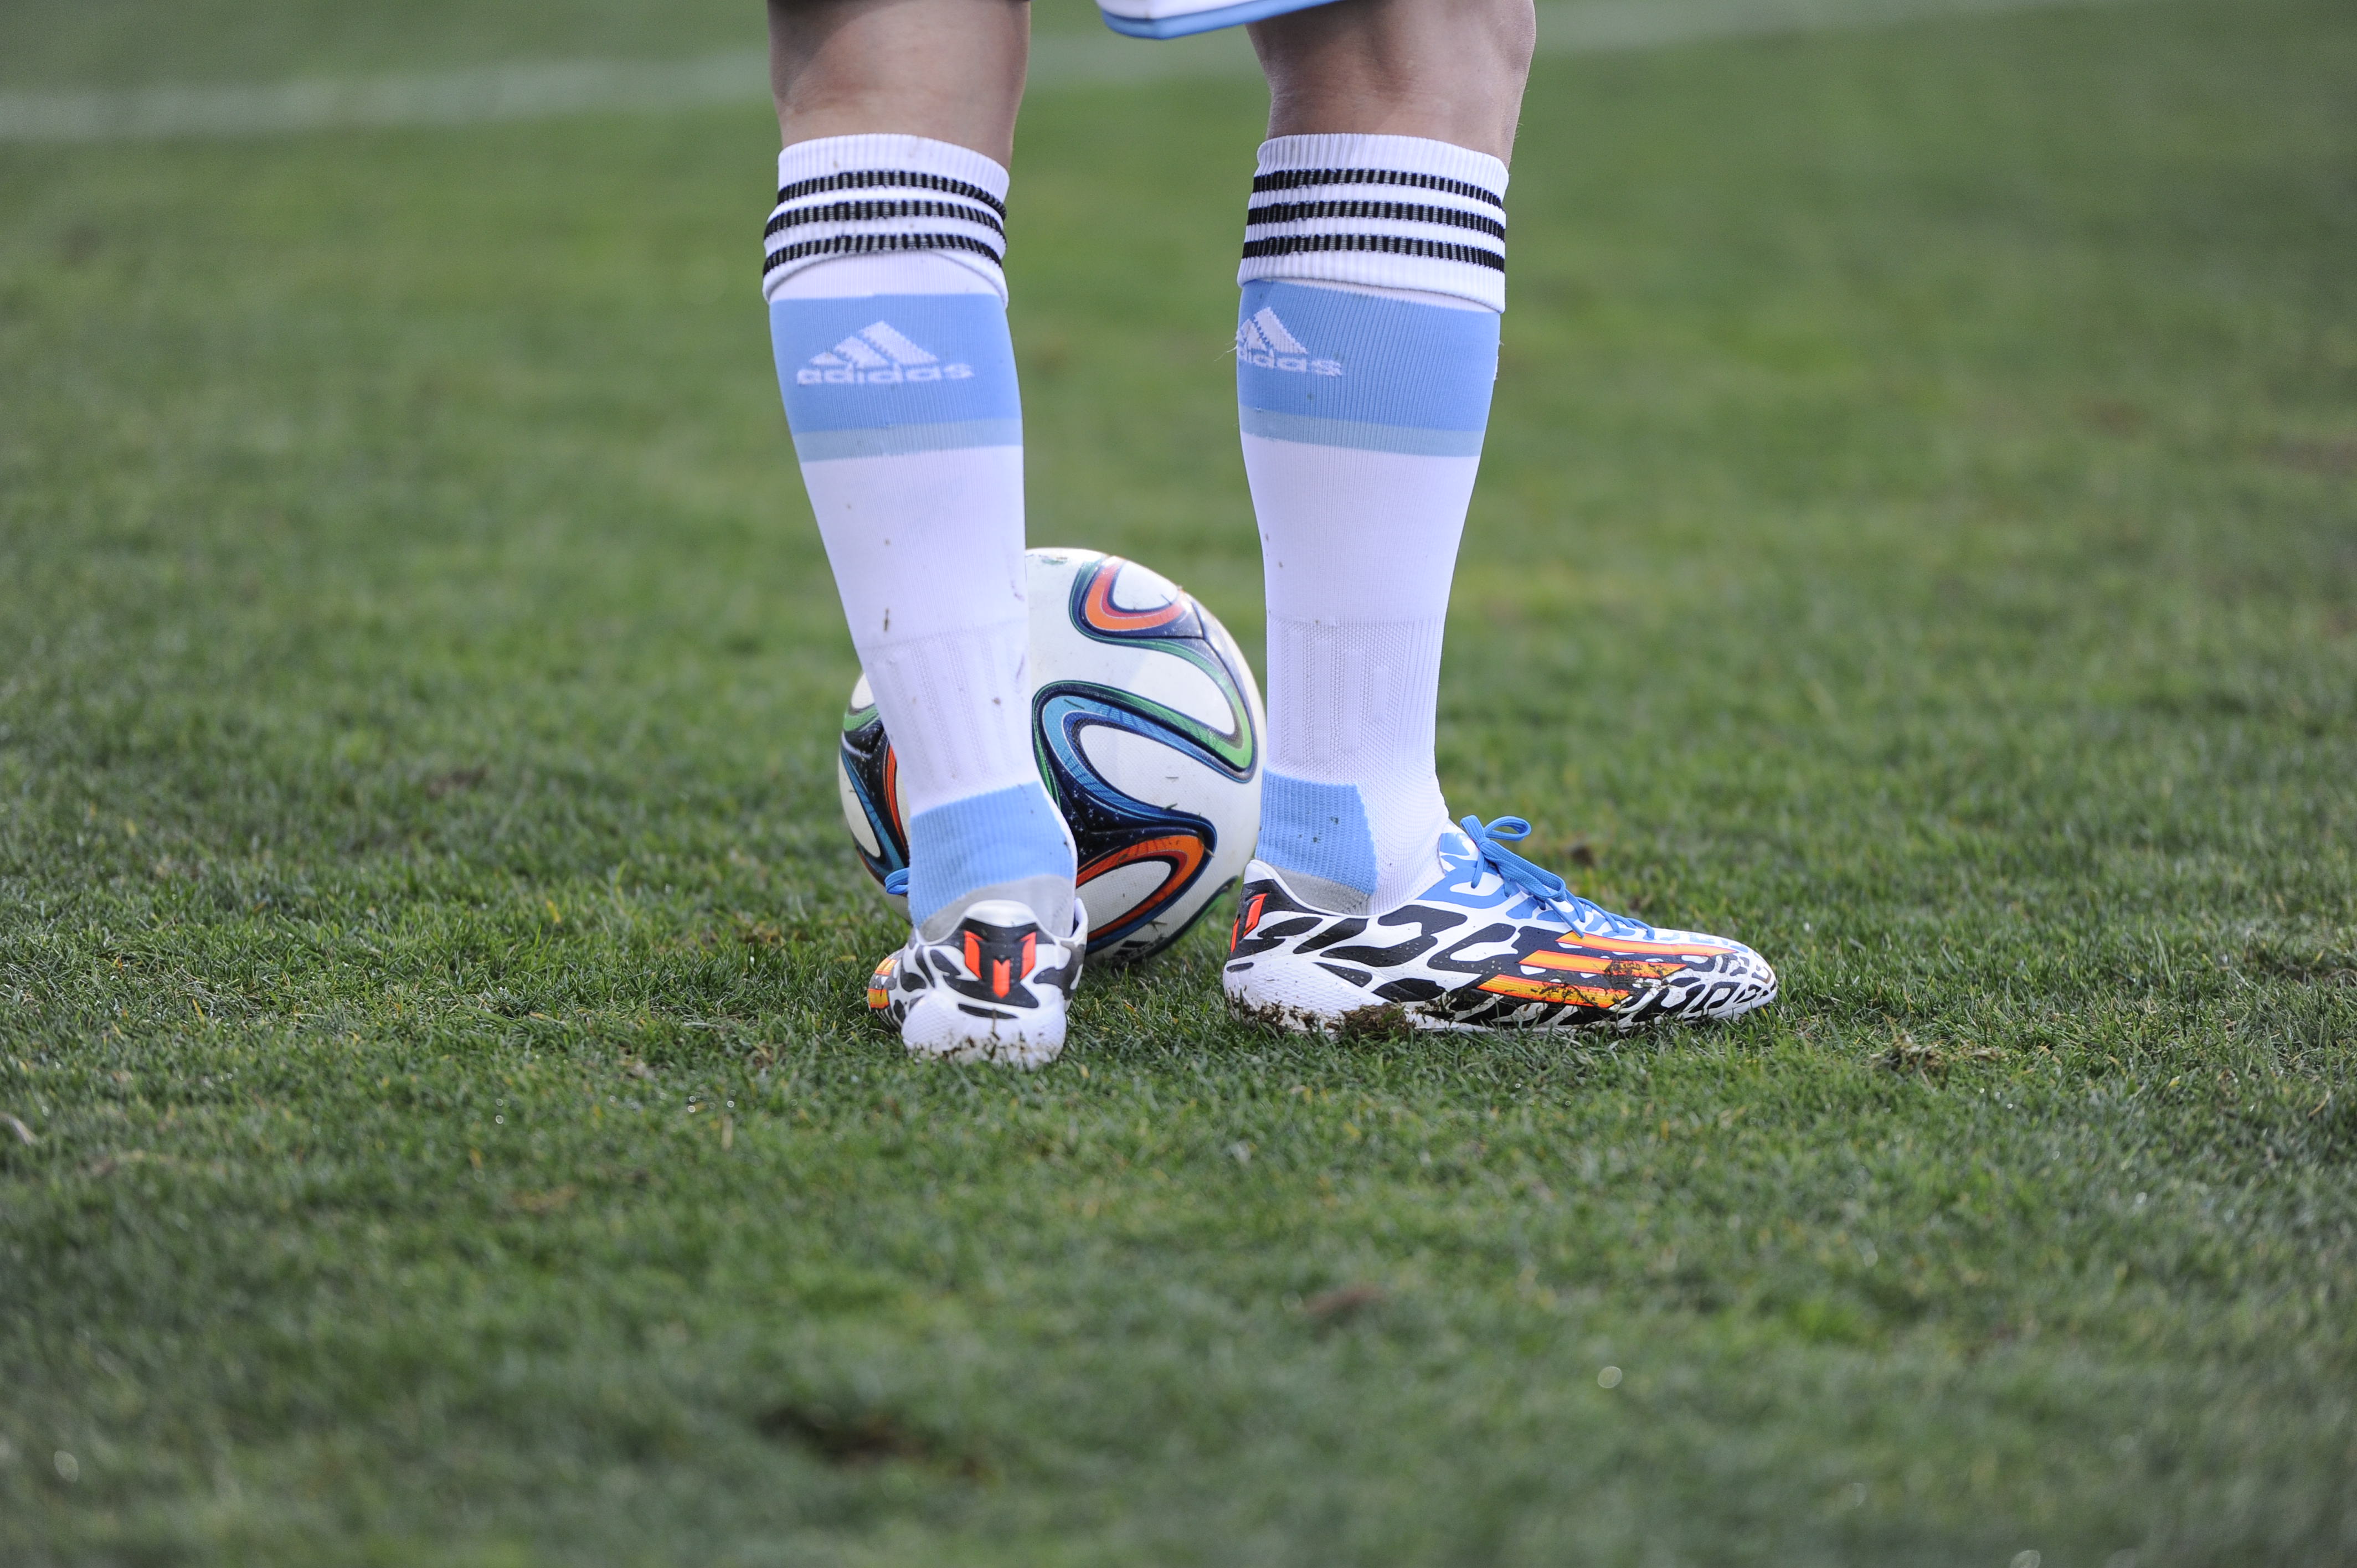 world cup 2014 shoes